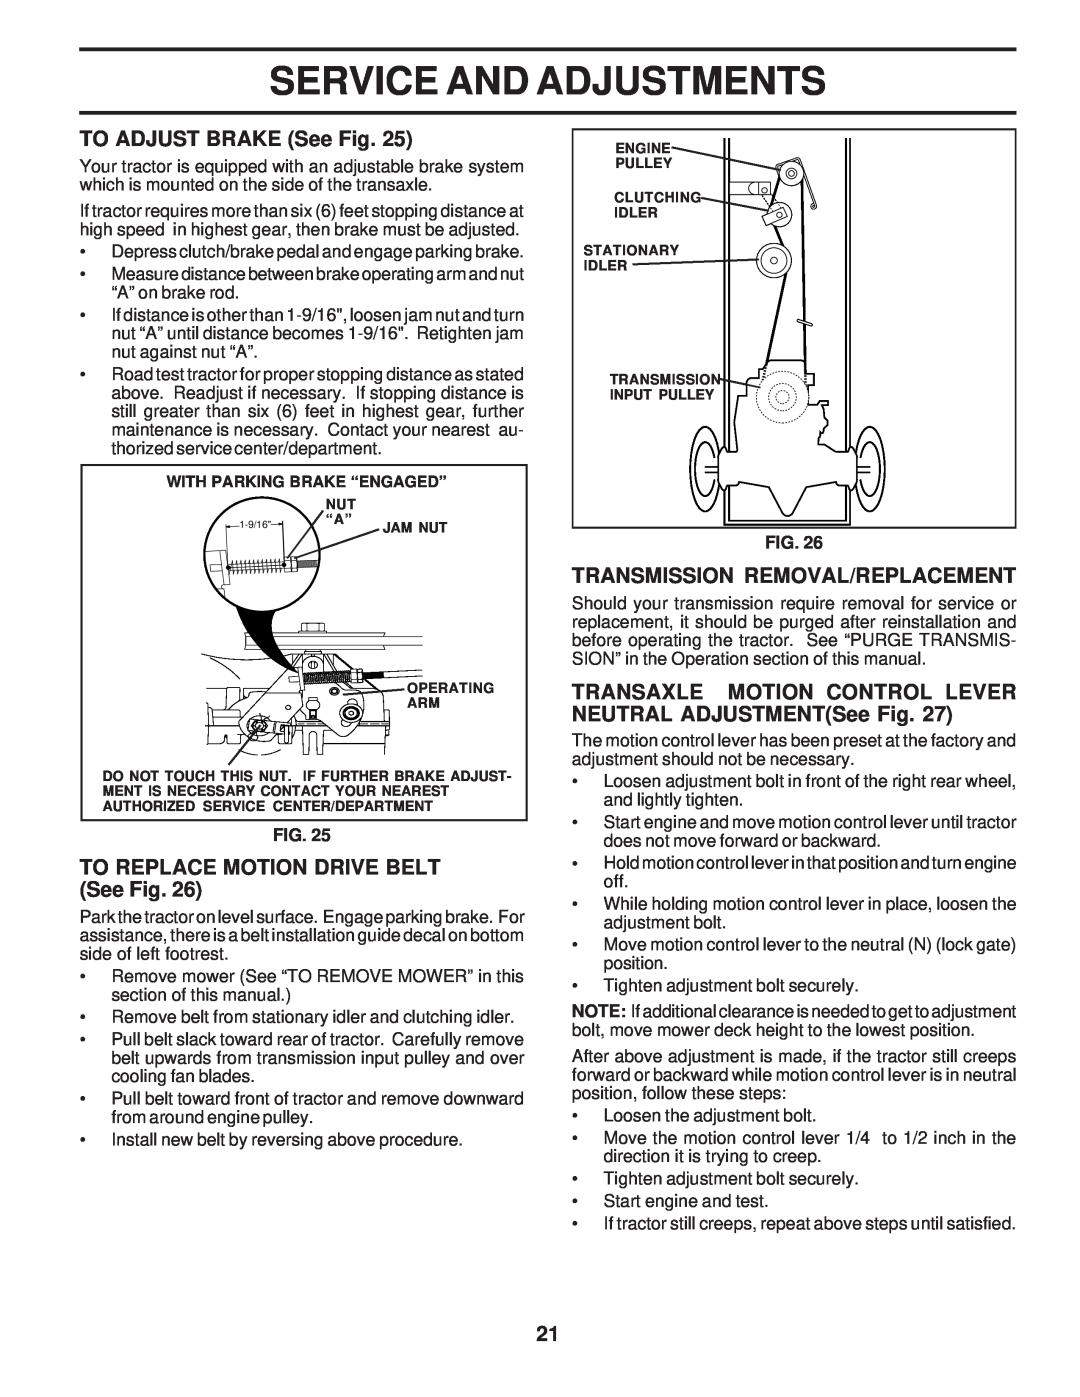 Poulan 173284, PPR17H42STC TO ADJUST BRAKE See Fig, TO REPLACE MOTION DRIVE BELT See Fig, Transmission Removal/Replacement 